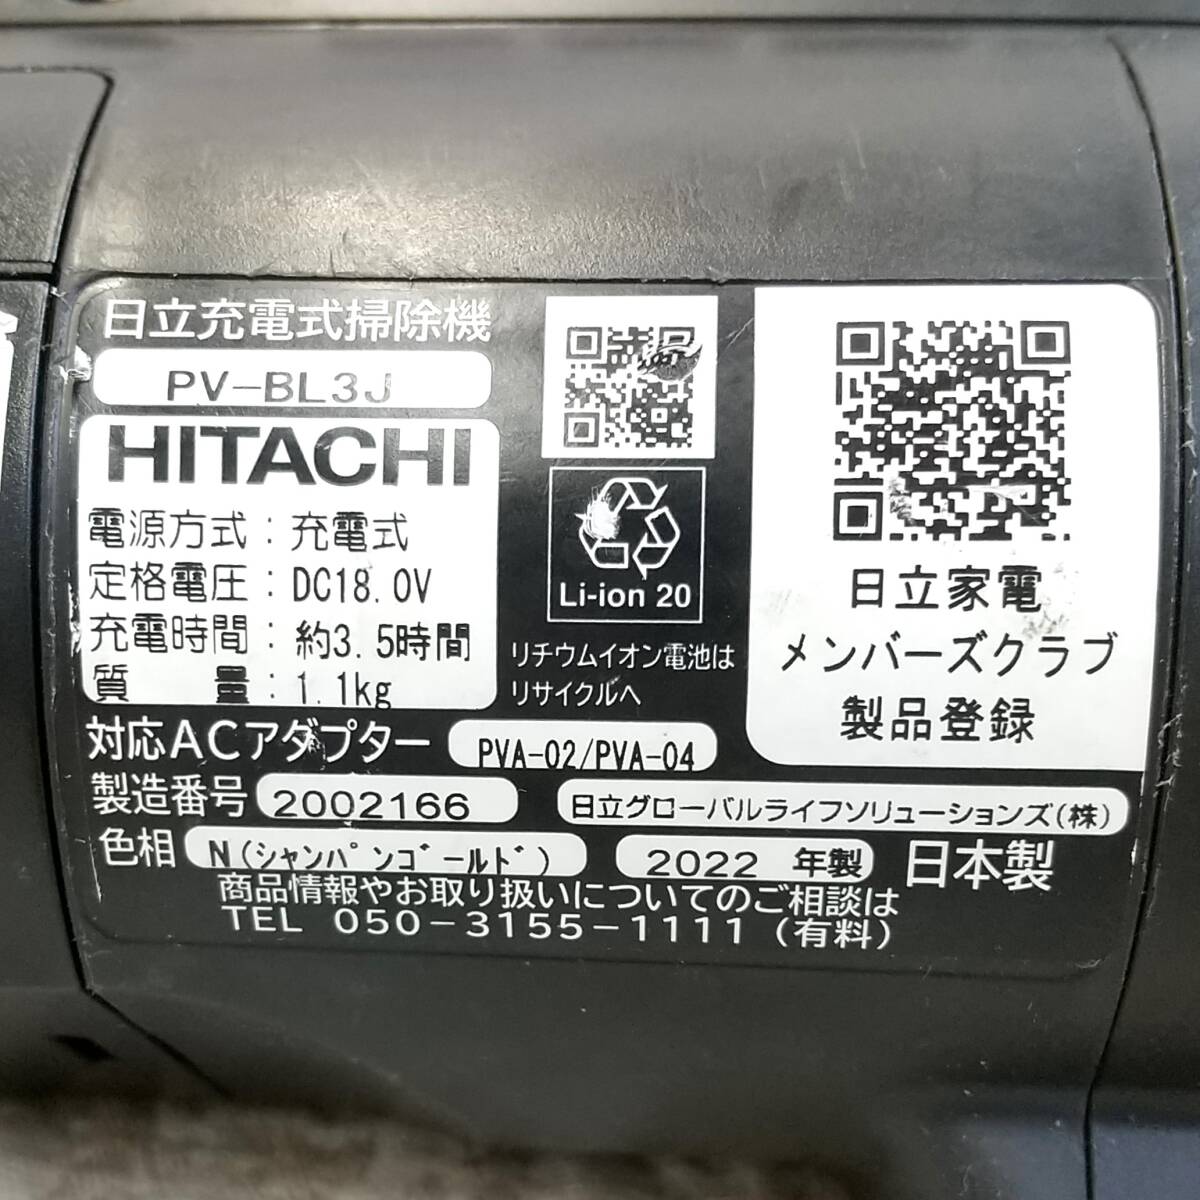 [663] secondhand goods 2022 year made Hitachi cordless cleaner PV-BL3J